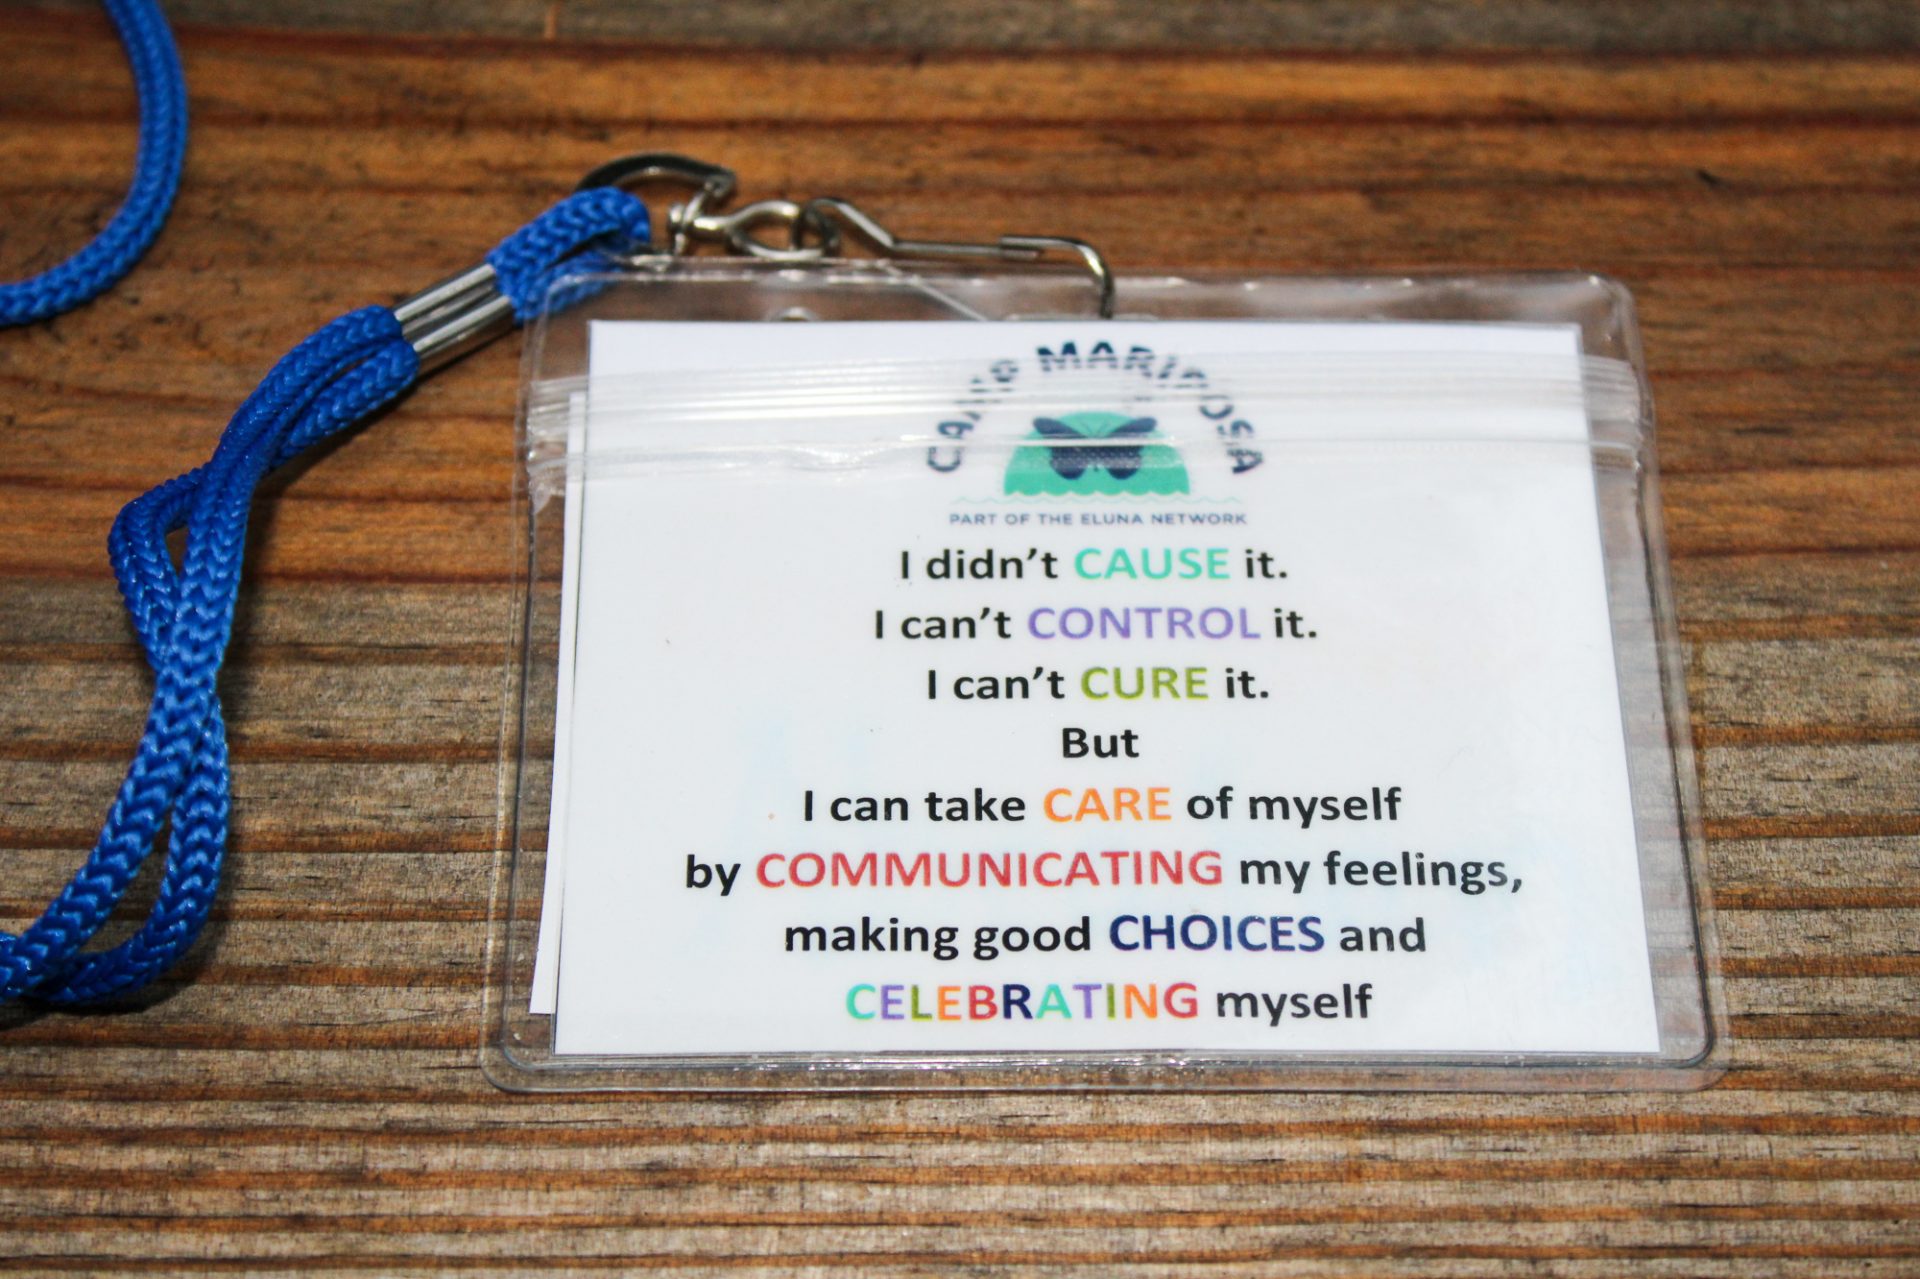 The lyrics of the Camp Mariposa song, "7 Cs," are printed out on lanyards so new campers can sing along. "It helps me realize that I didn't cause what happened to me," one child said. "It makes me feel much better."